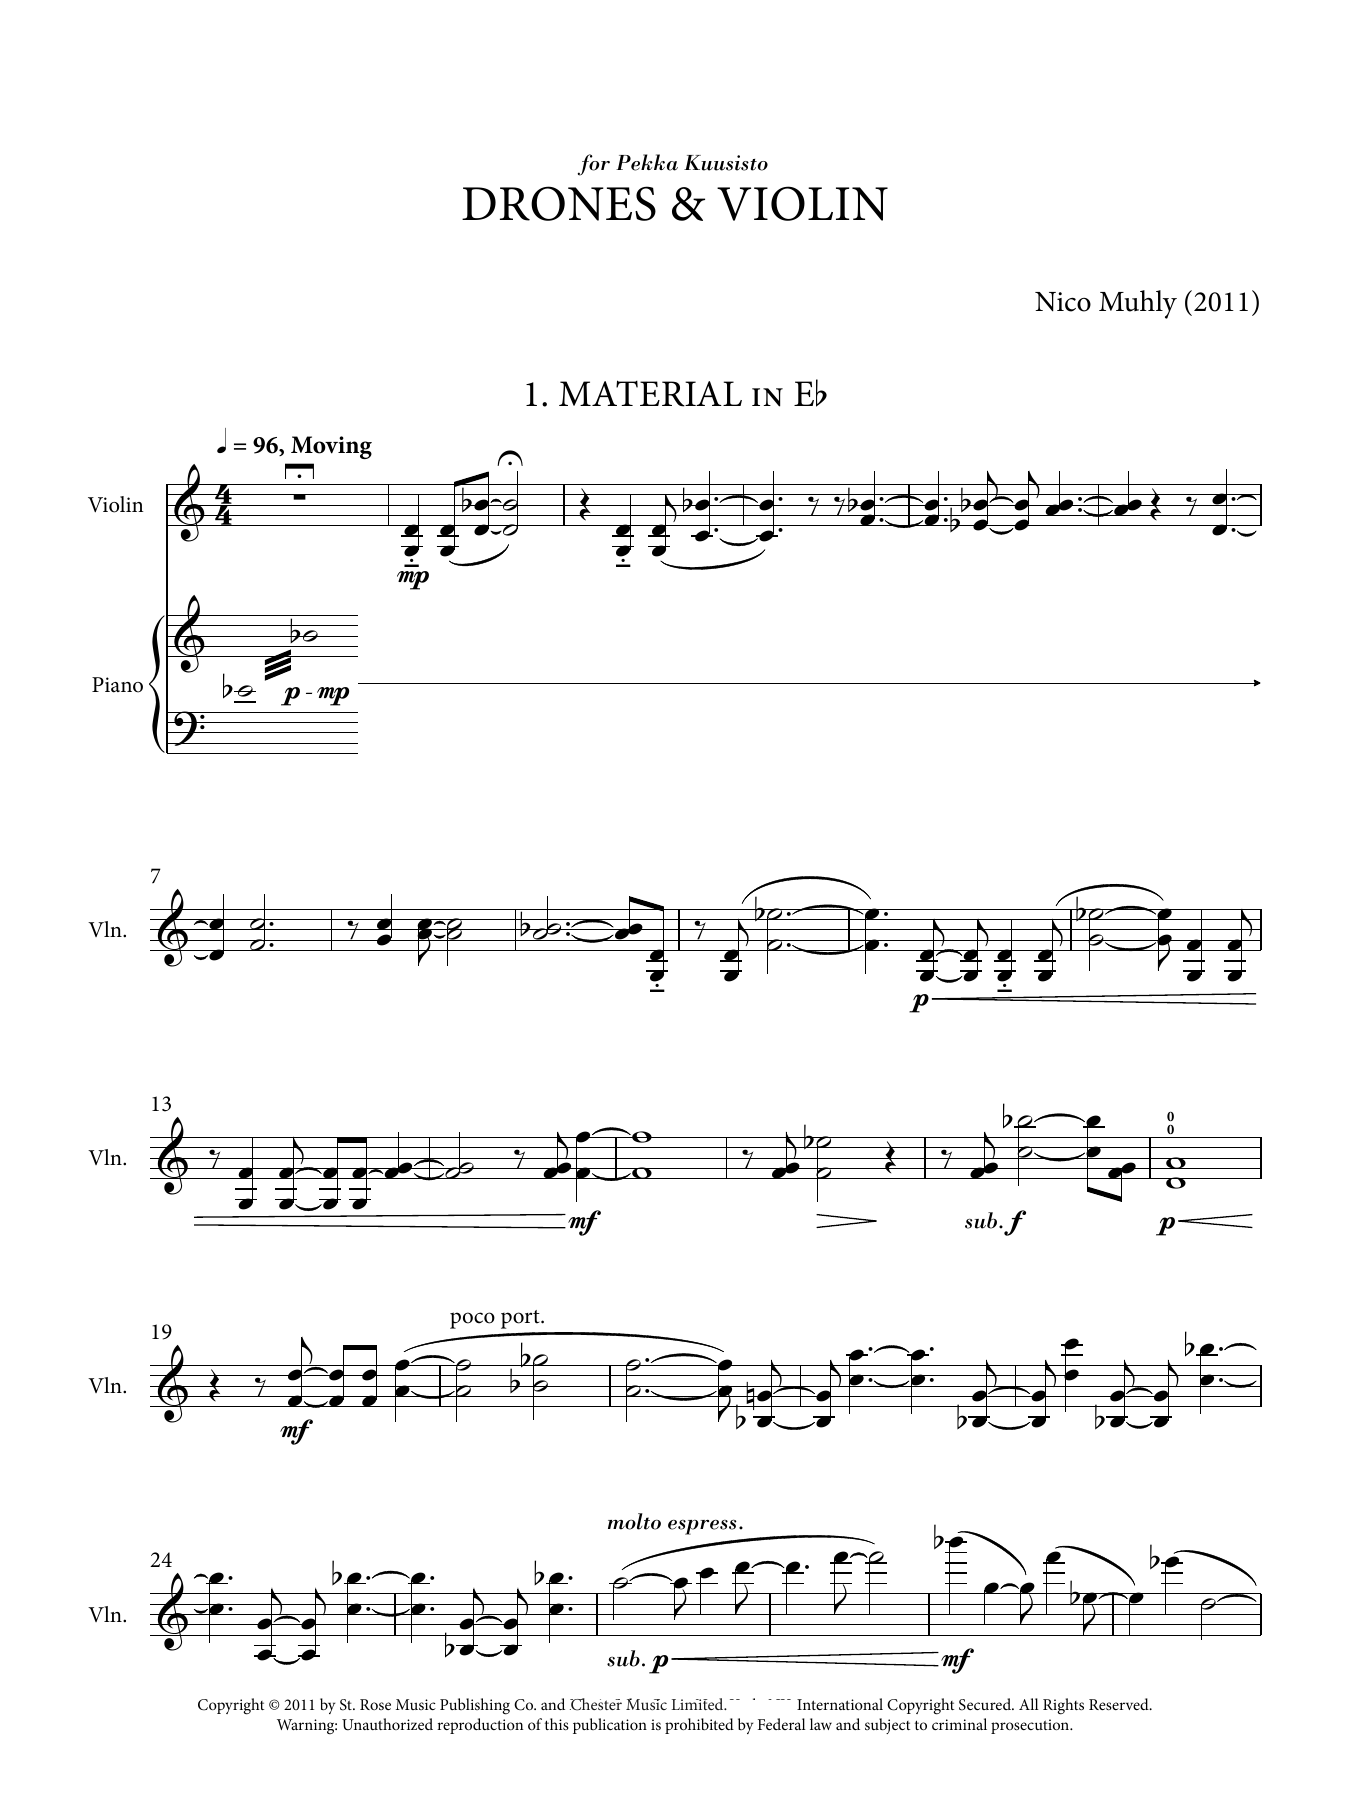 Download Nico Muhly Drones And Violin Sheet Music